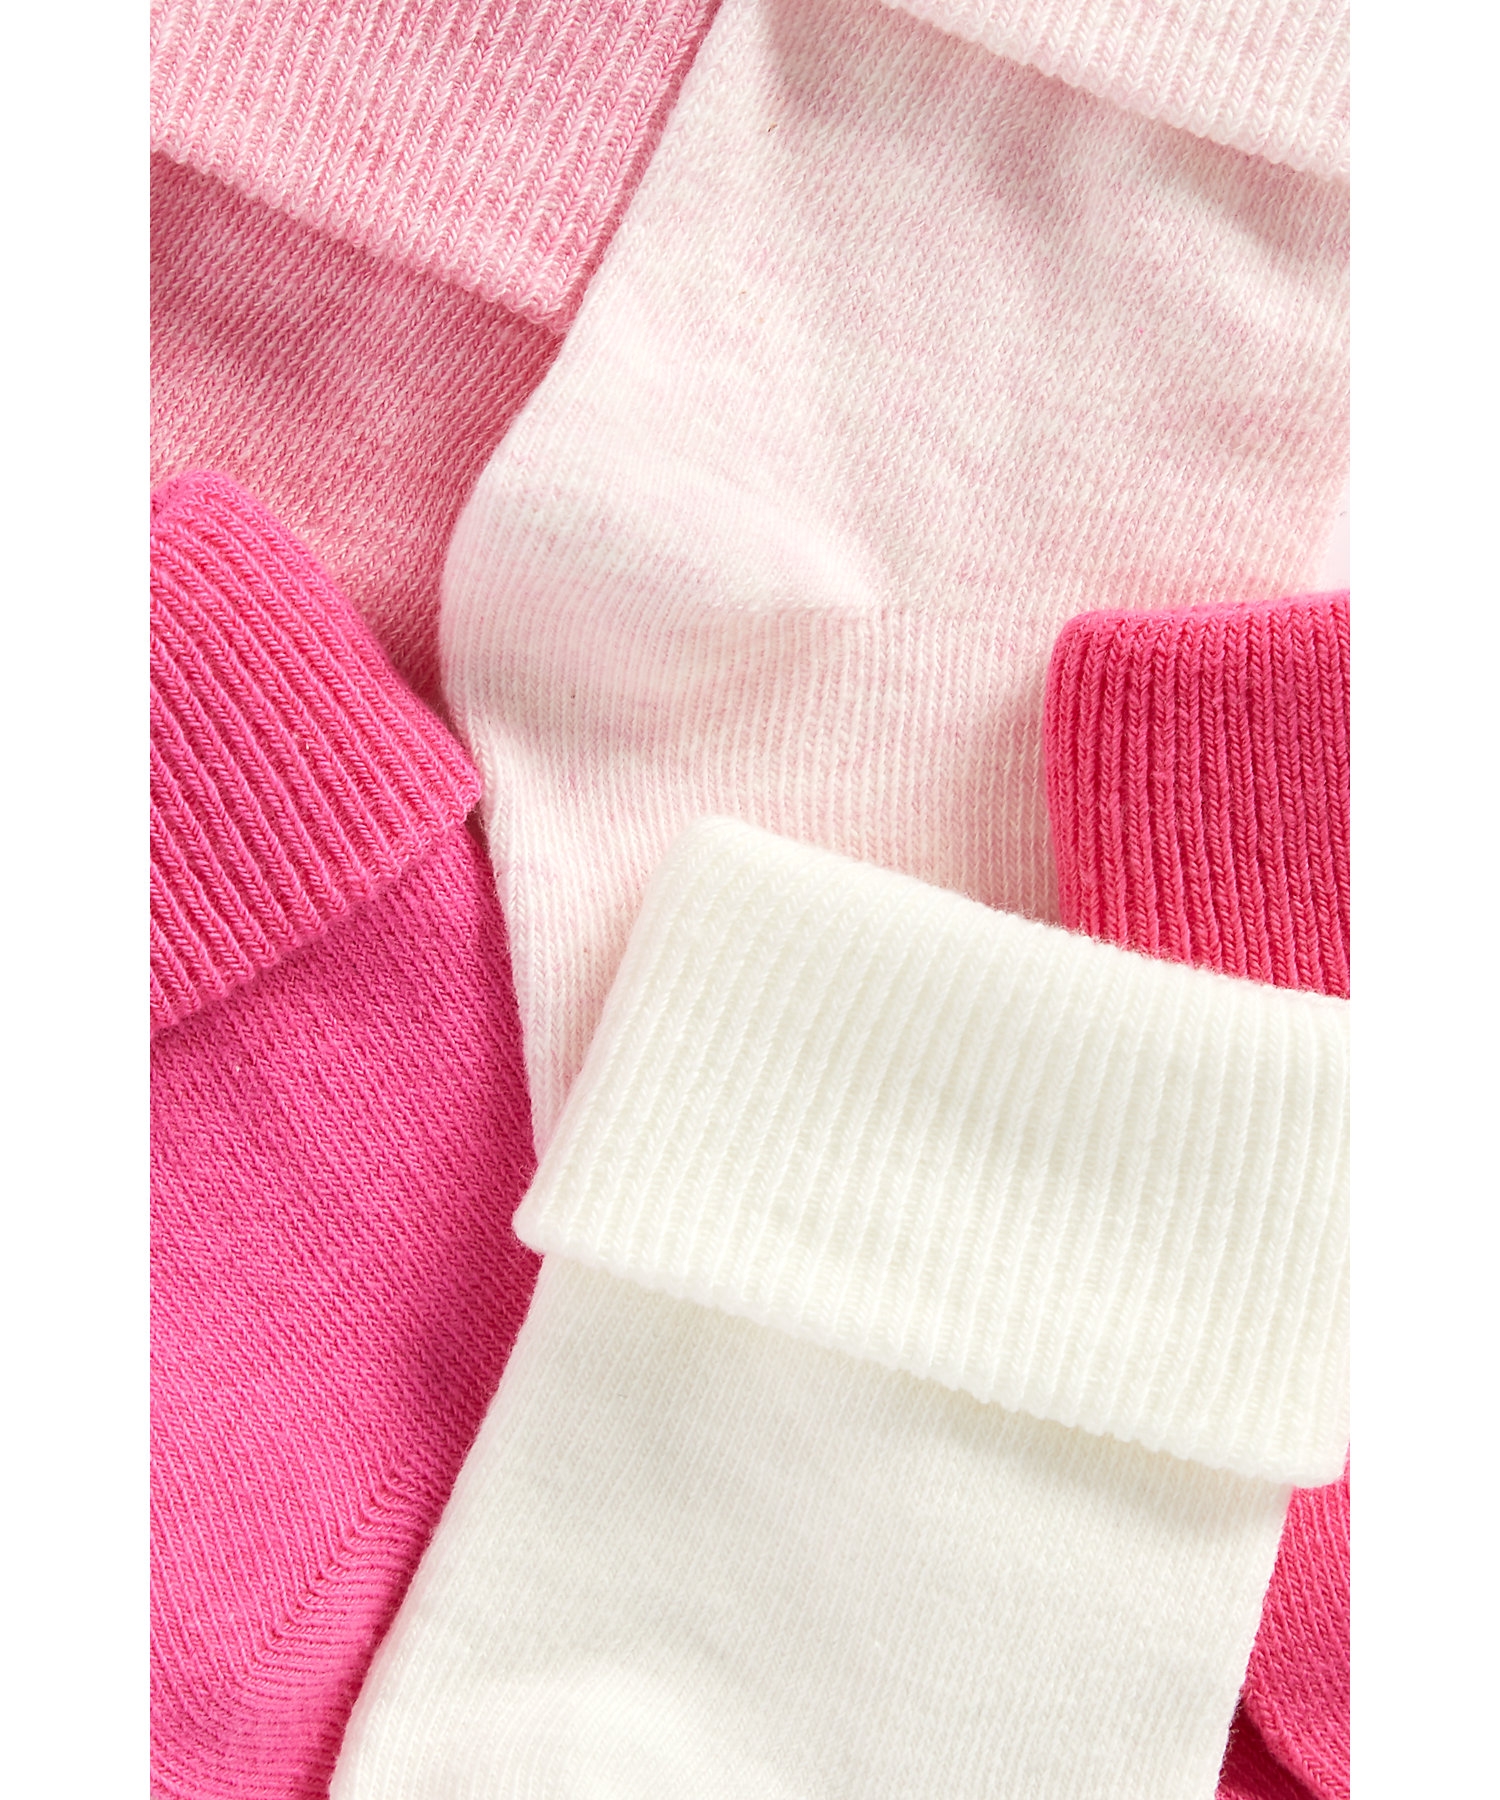 Mothercare | Girls Turn-Over-Top Socks - Pack Of 5 - Pink 2